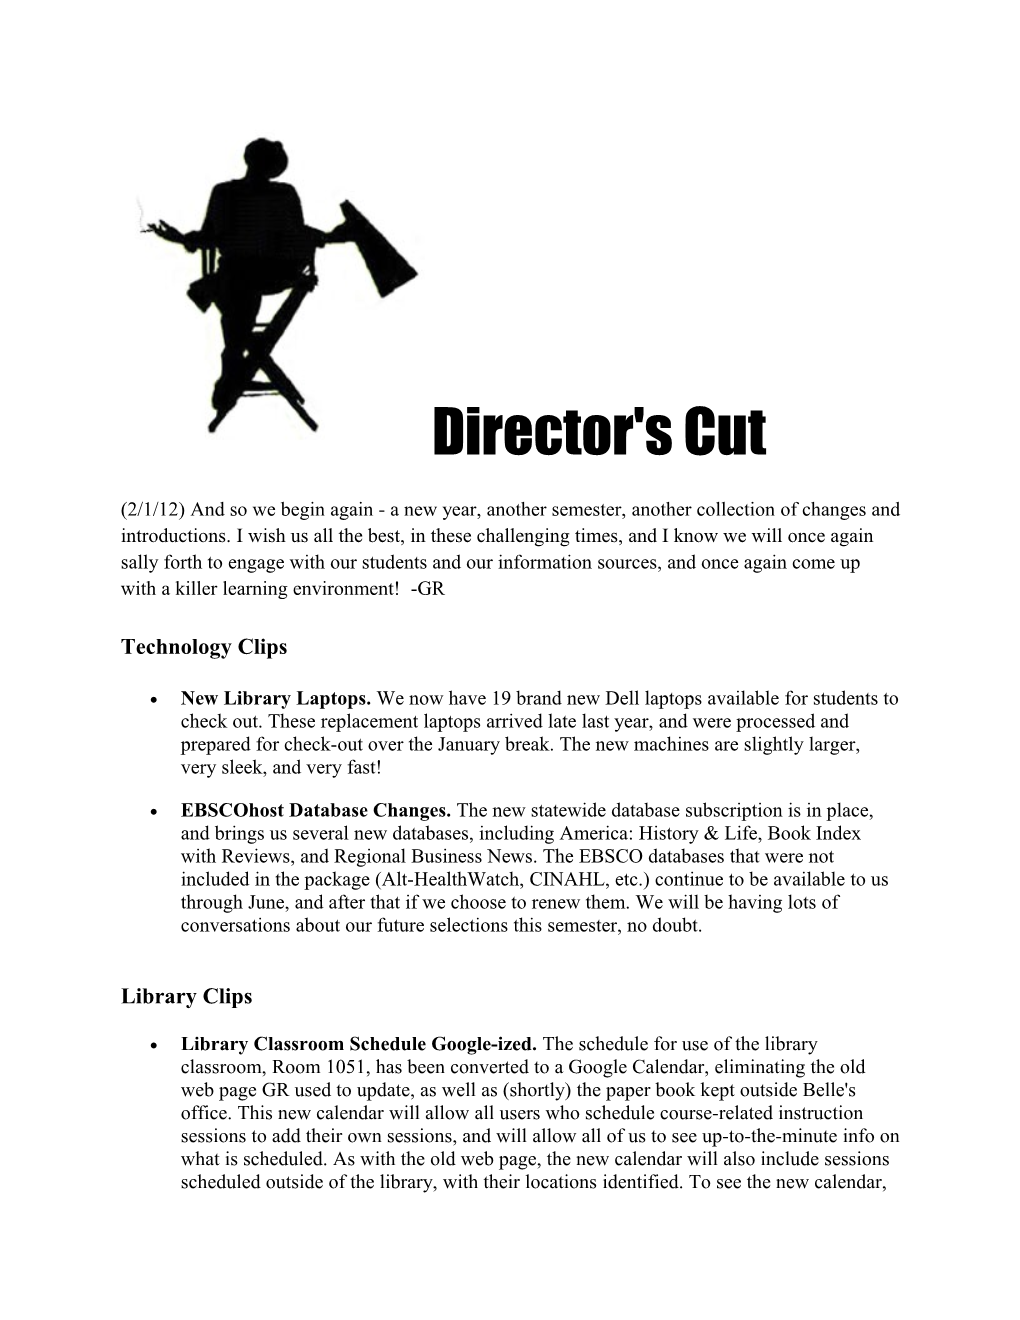 Director's Cut (2/1/12) and So We Begin Again - a New Year, Another Semester, Another